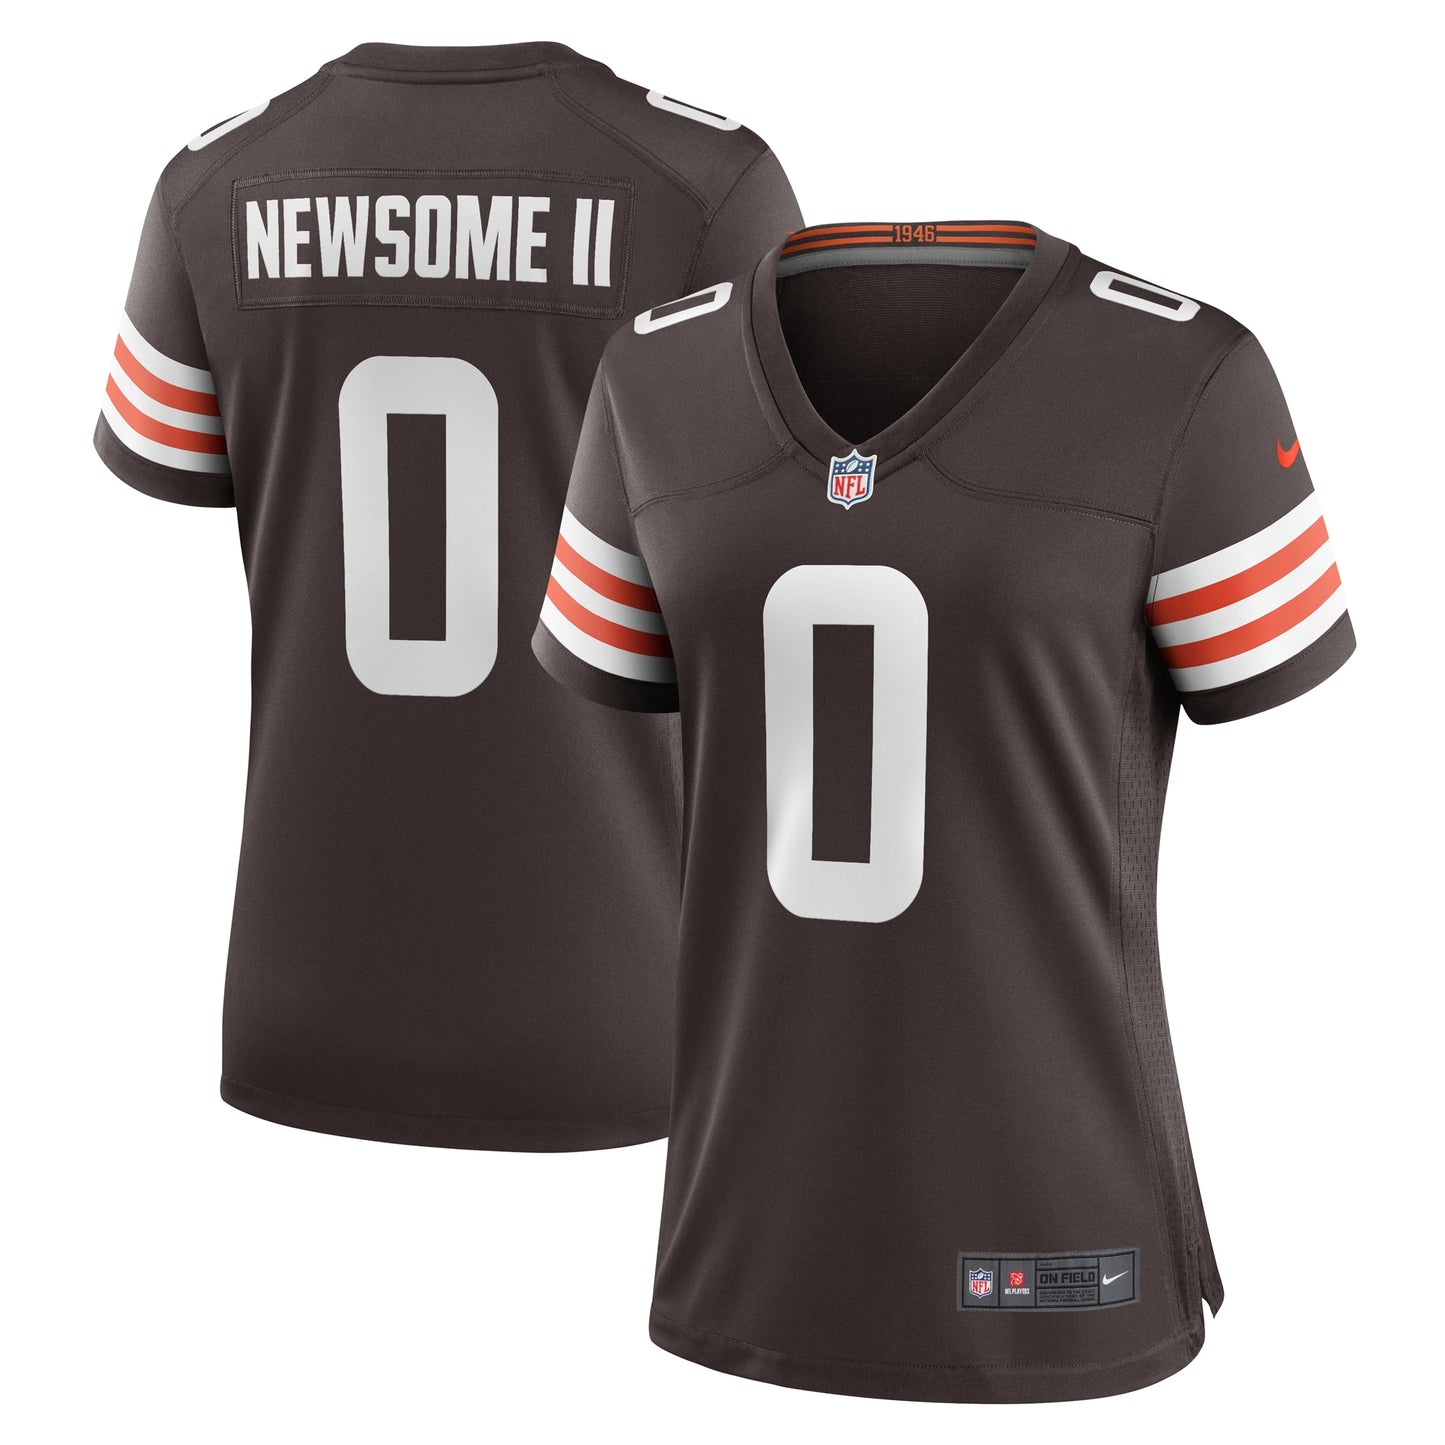 Greg Newsome II Cleveland Browns Nike Women's Team Game Jersey - Brown